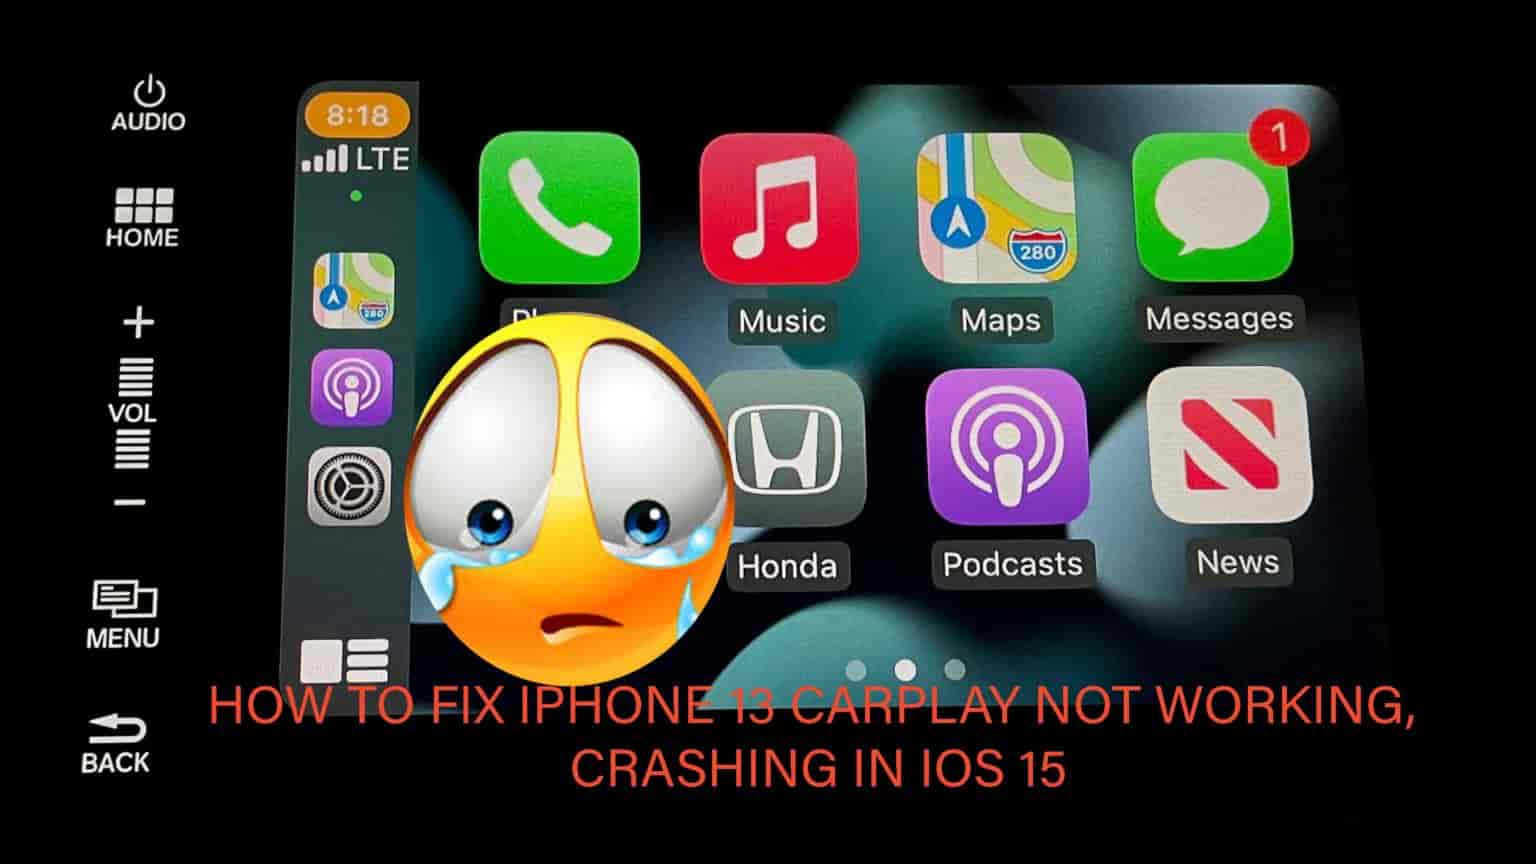 iOS 15 – CarPlay issues for some iPhones